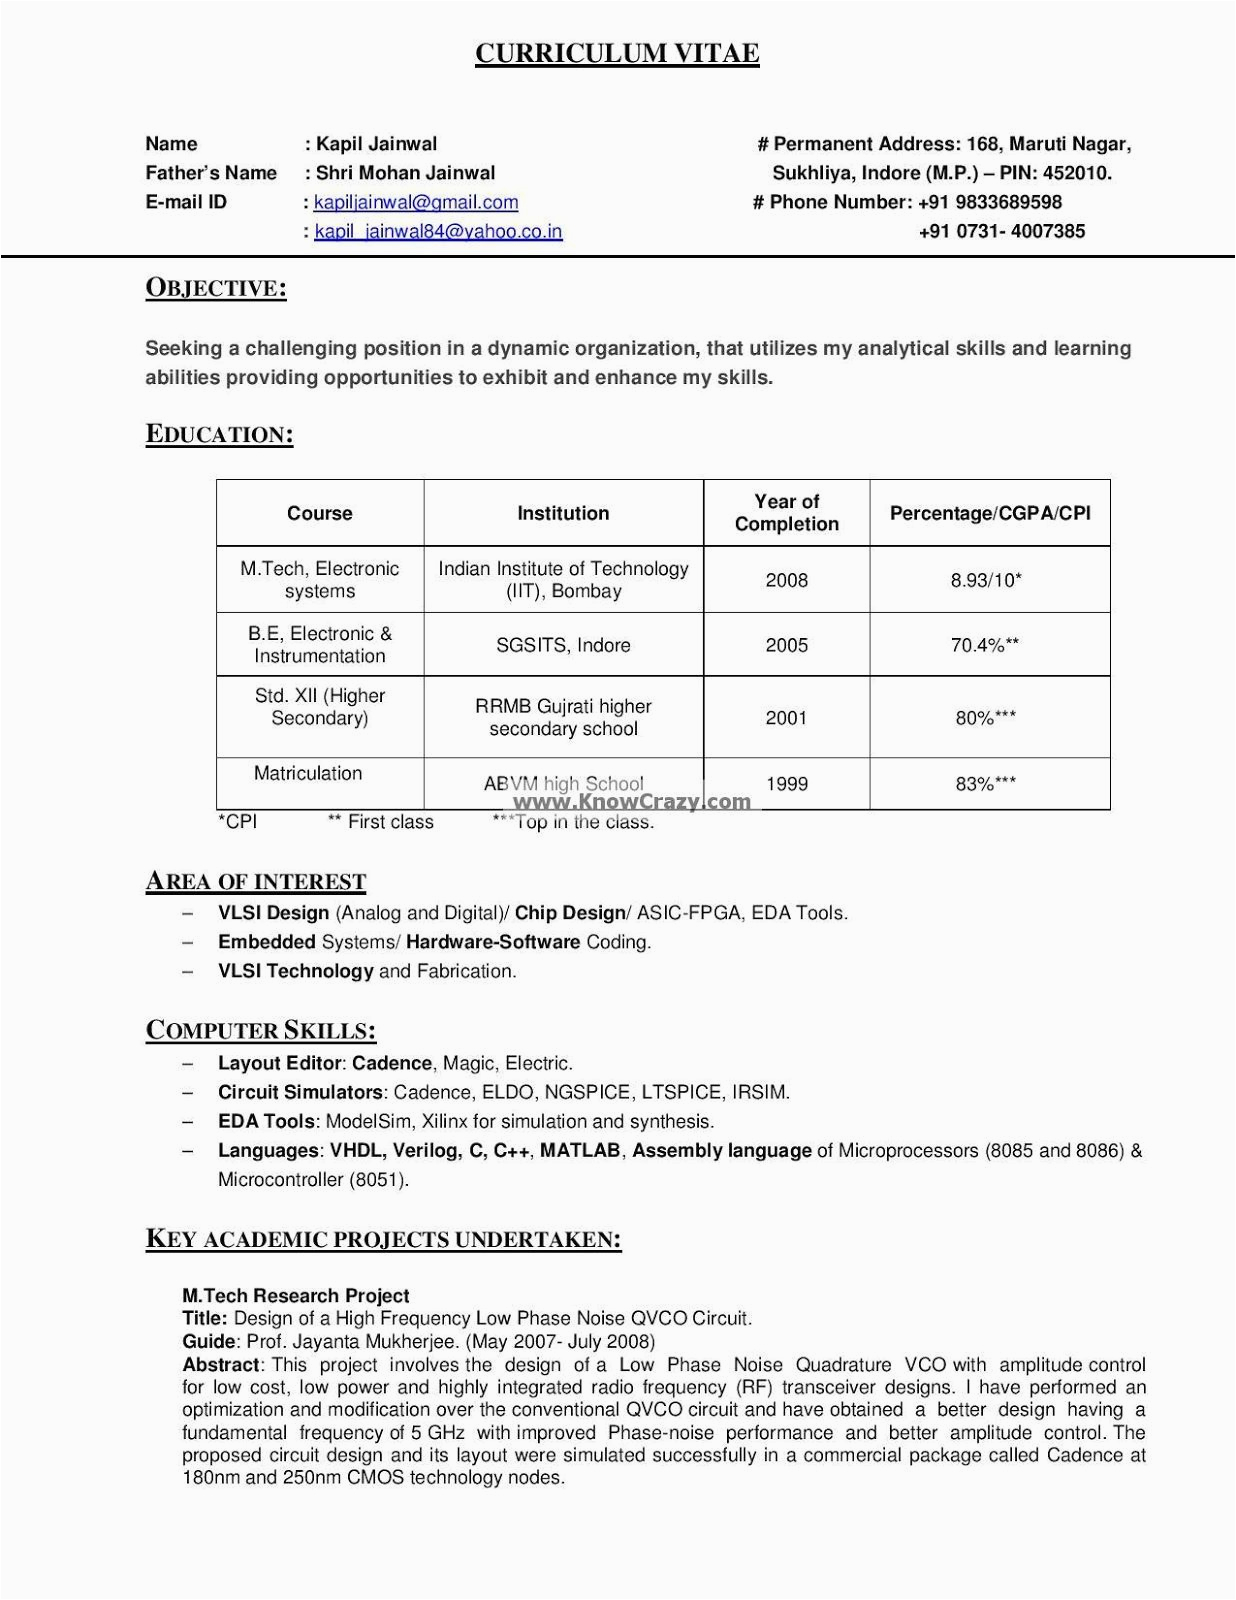 Sample Resume for It Jobs In India Classy Ficial Resume format India 100 [ Good Resume Sample India